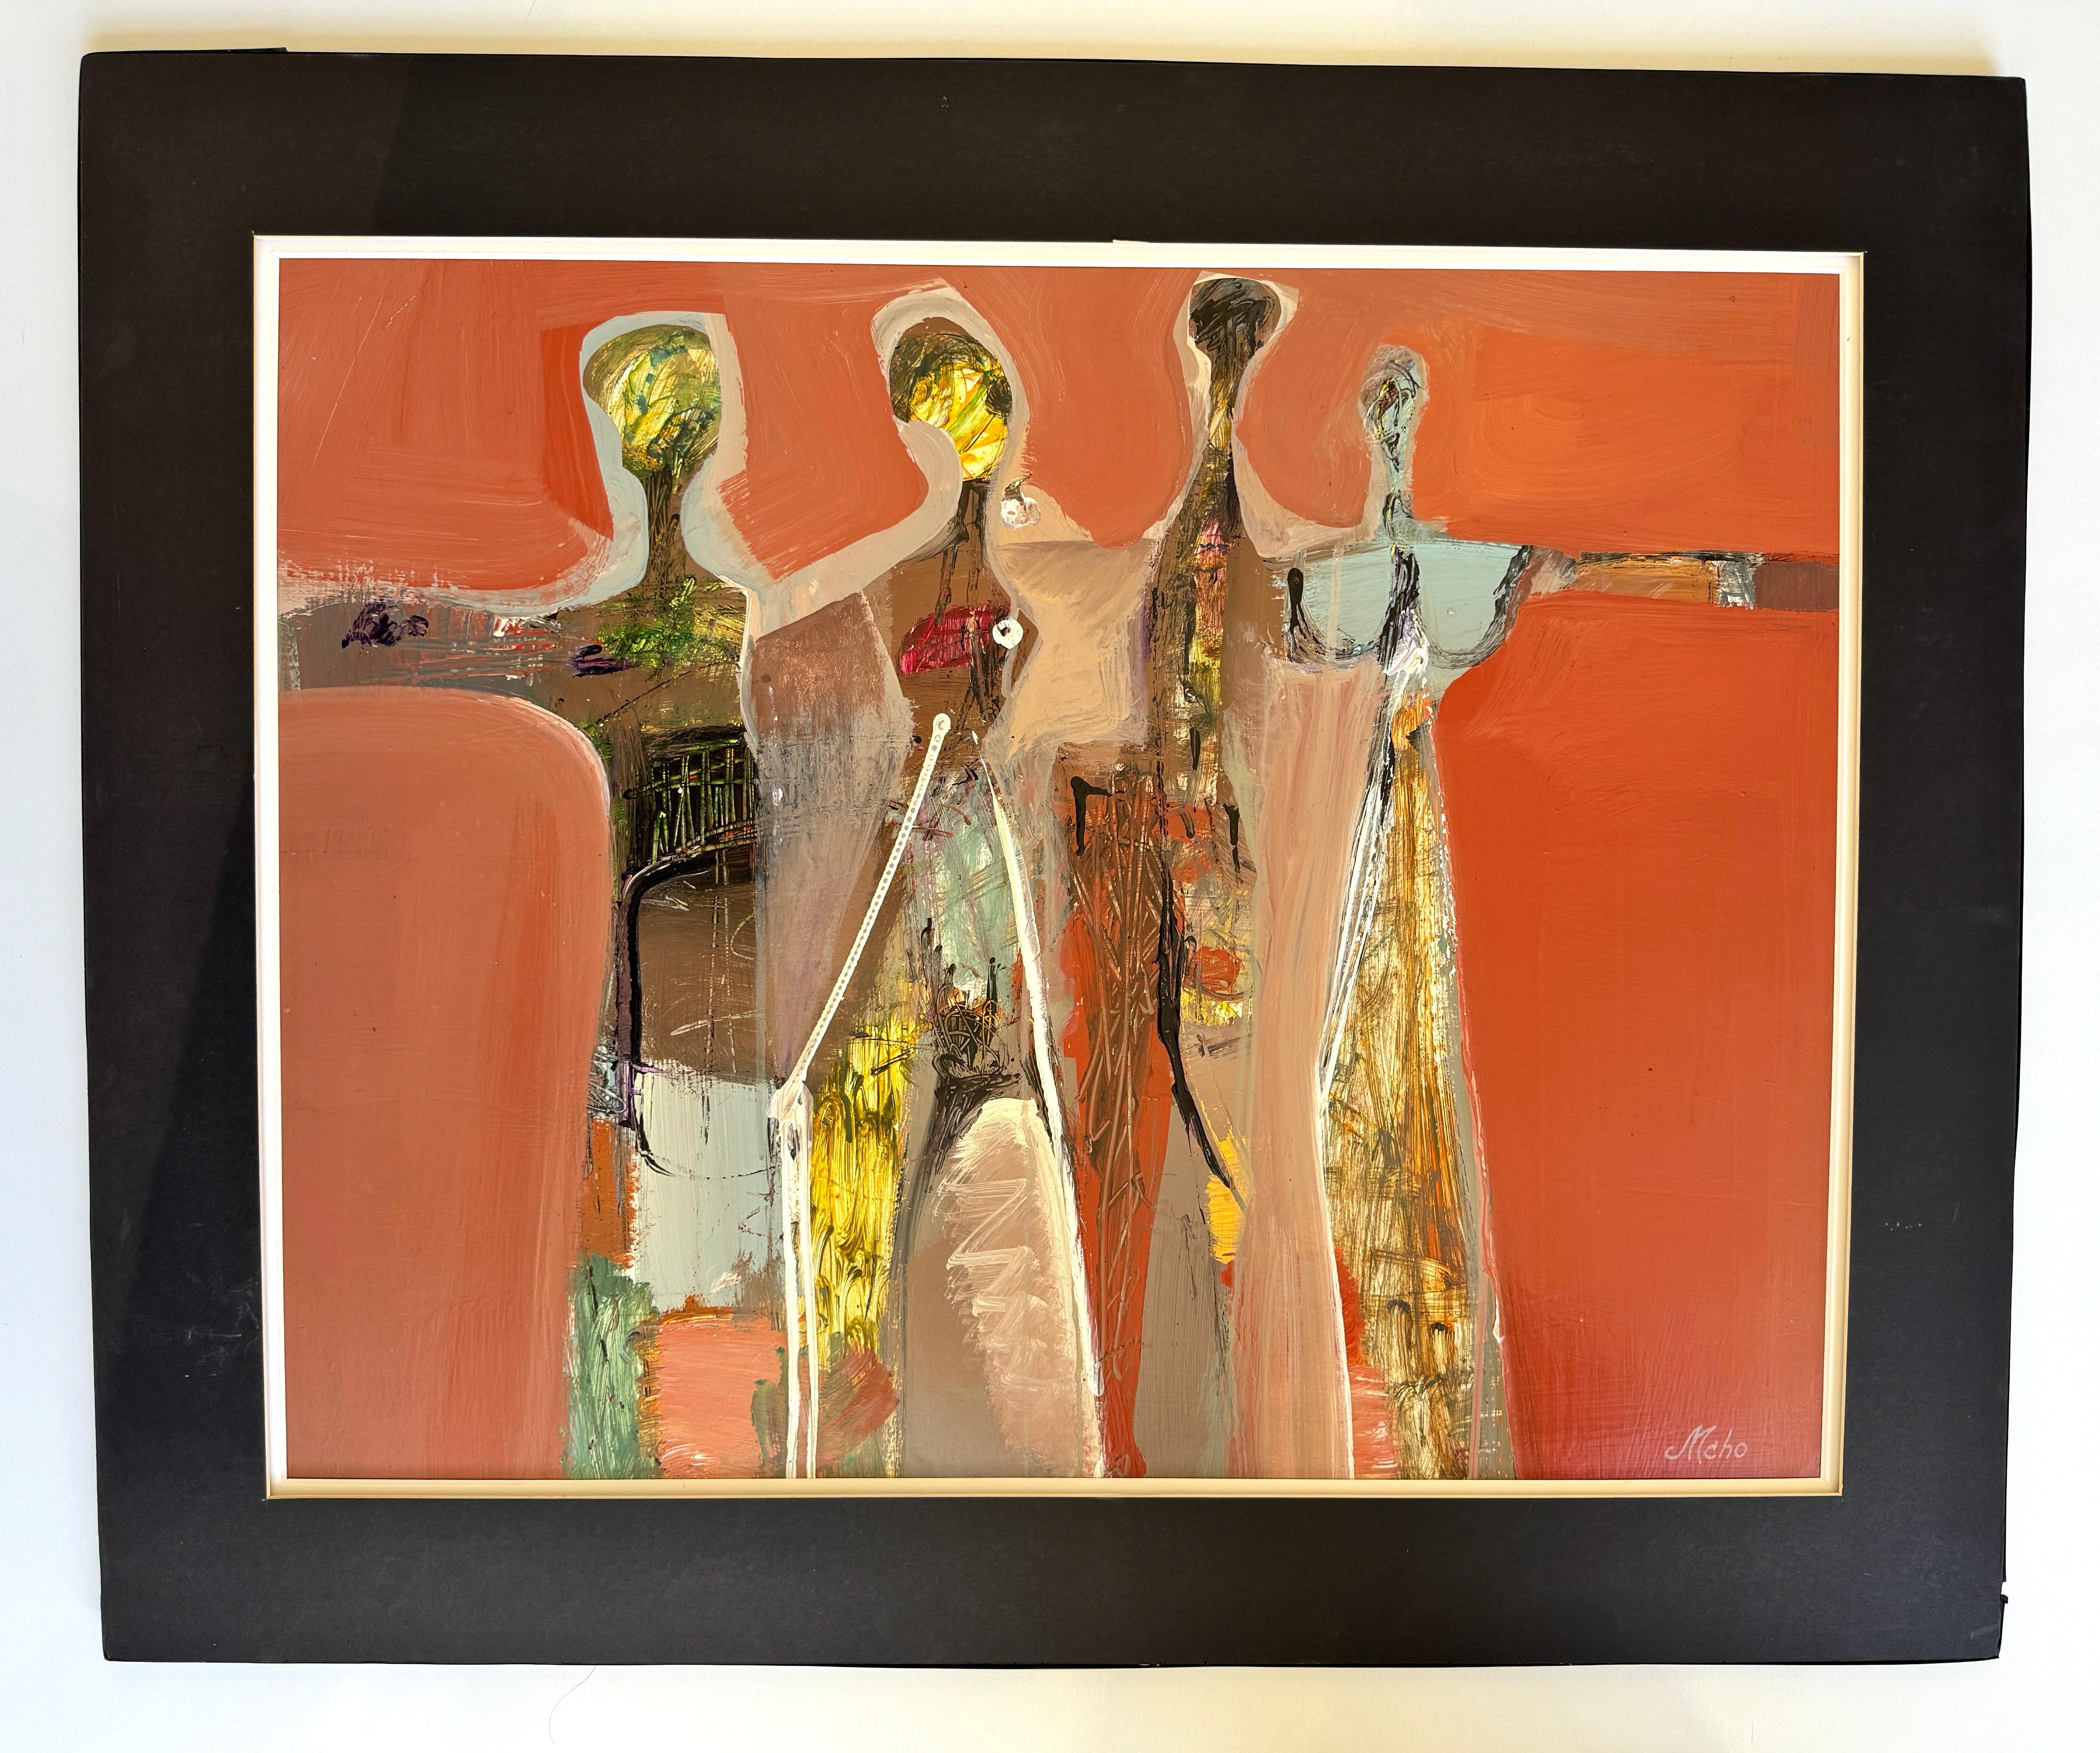 Artist: Mkrtich Sarkisyan (Mcho)
Work: Original Painting, Handmade Artwork, One of a Kind 
Medium: Acrylic on Paper 
Year: 2023
Style: Abstract Figurative 
Subject: Party
Size: 23